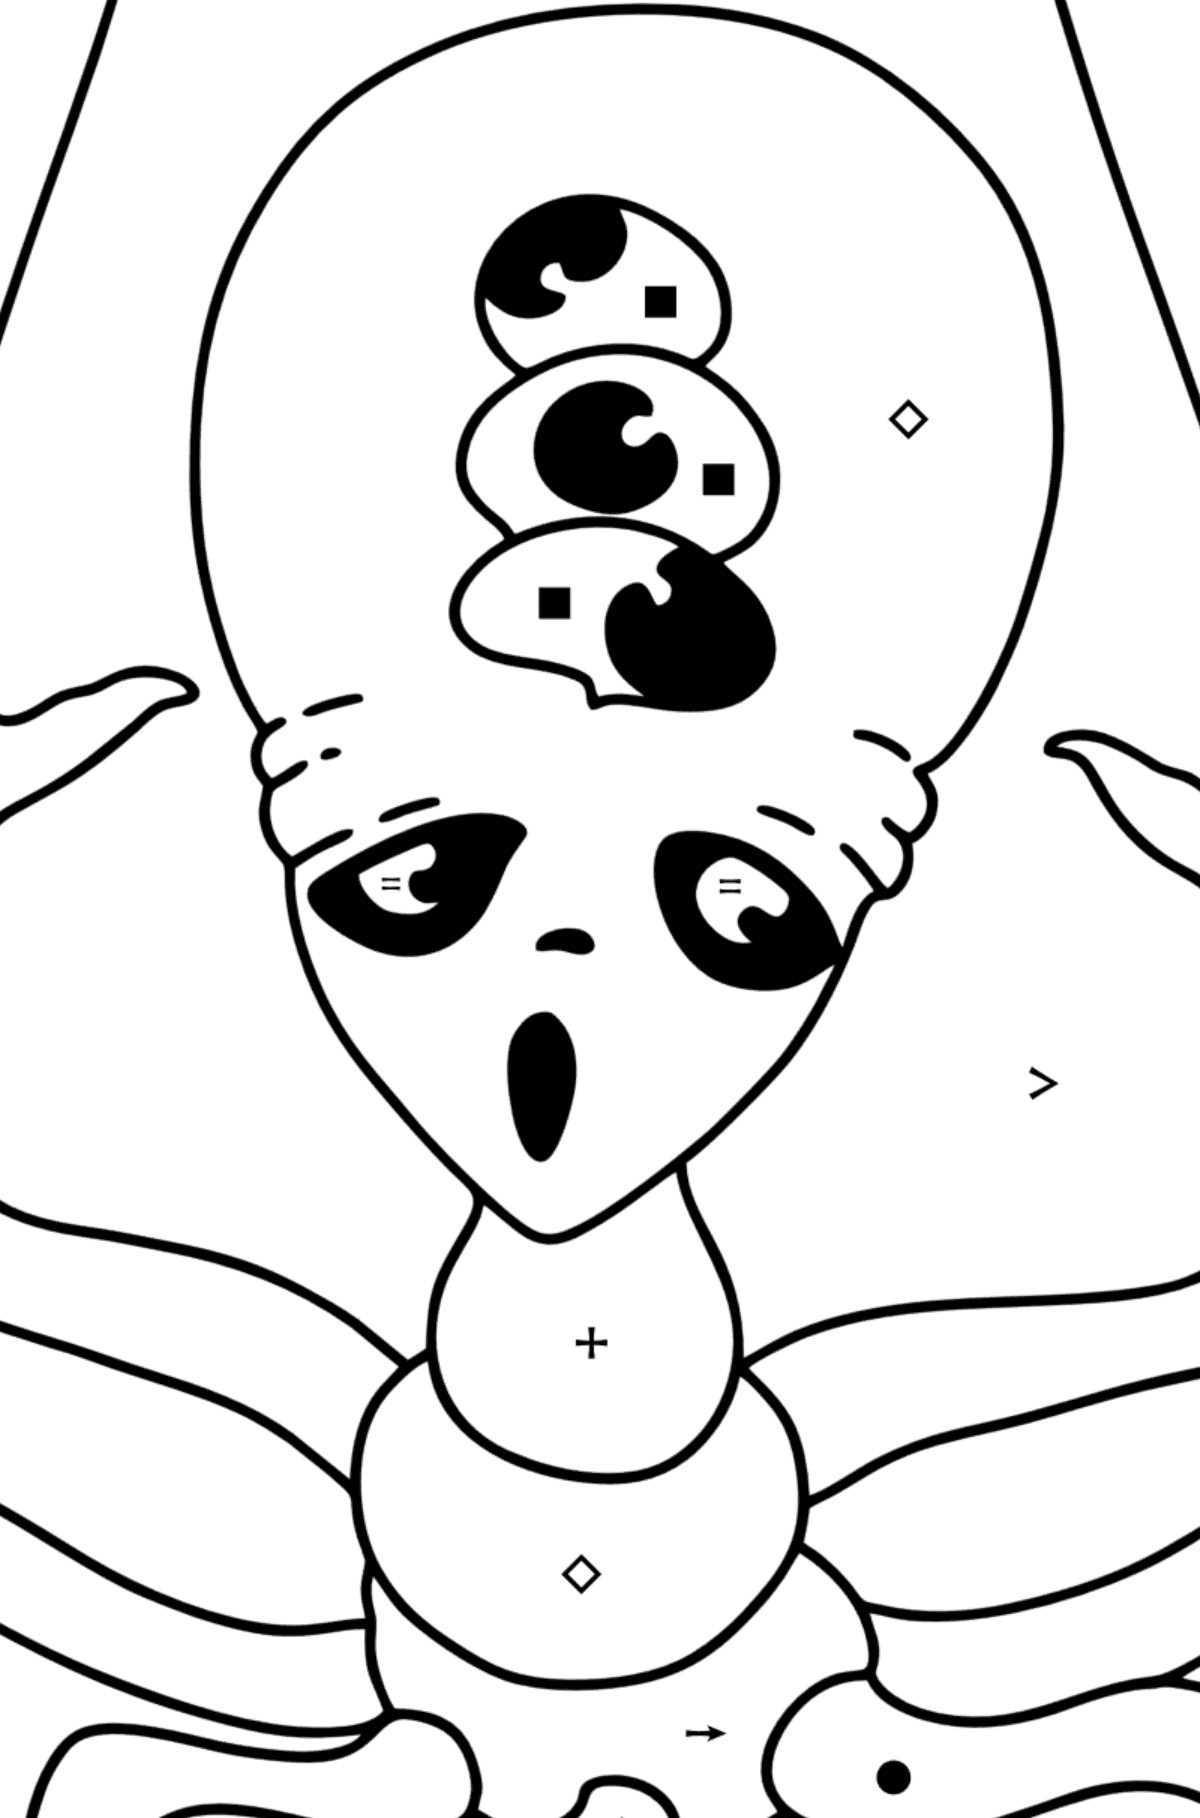 Scary Alien Coloring page - Coloring by Symbols for Kids